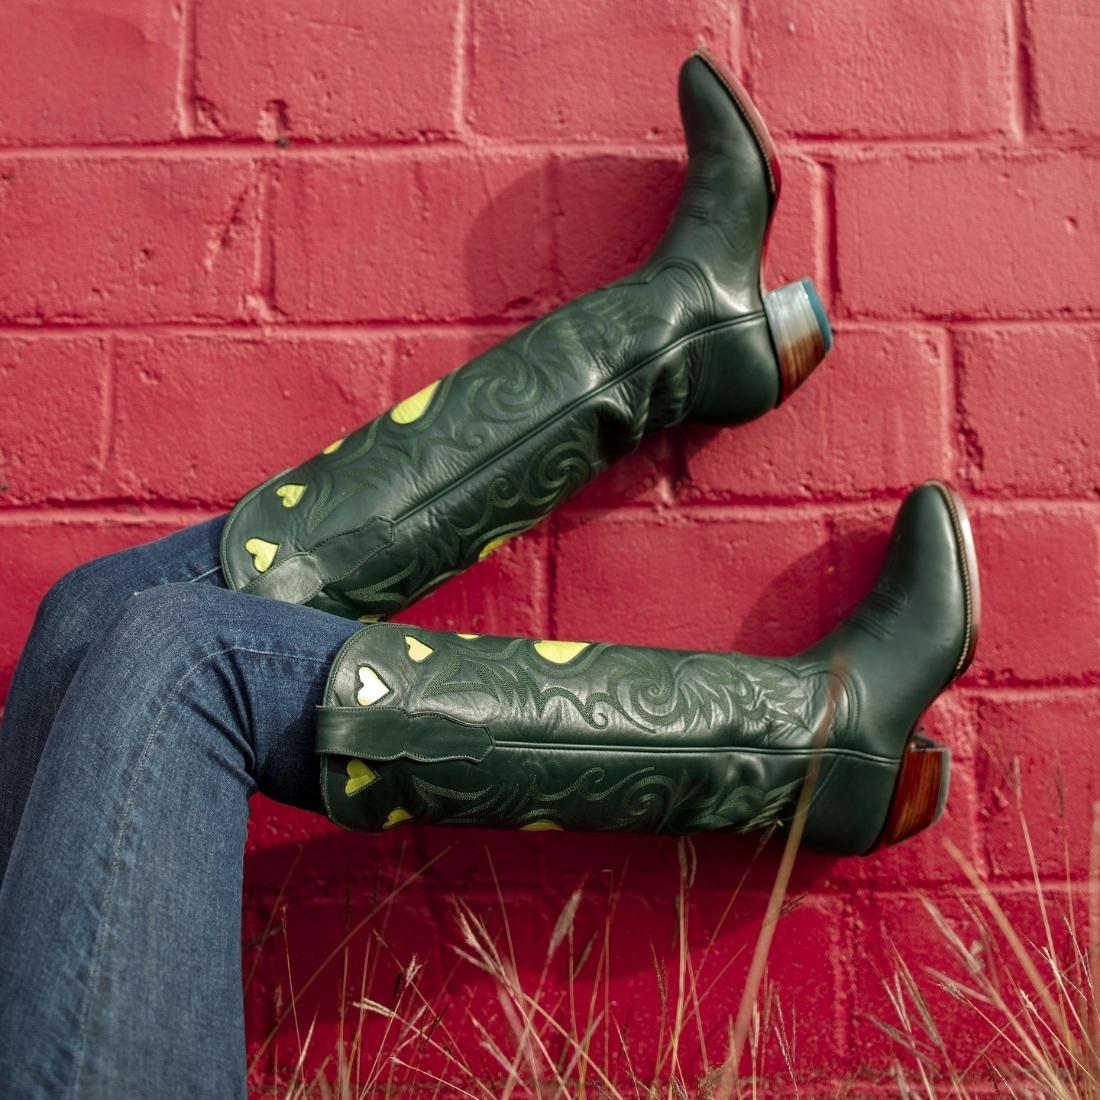 The Heart Boot Green In Stock - CITY Boots